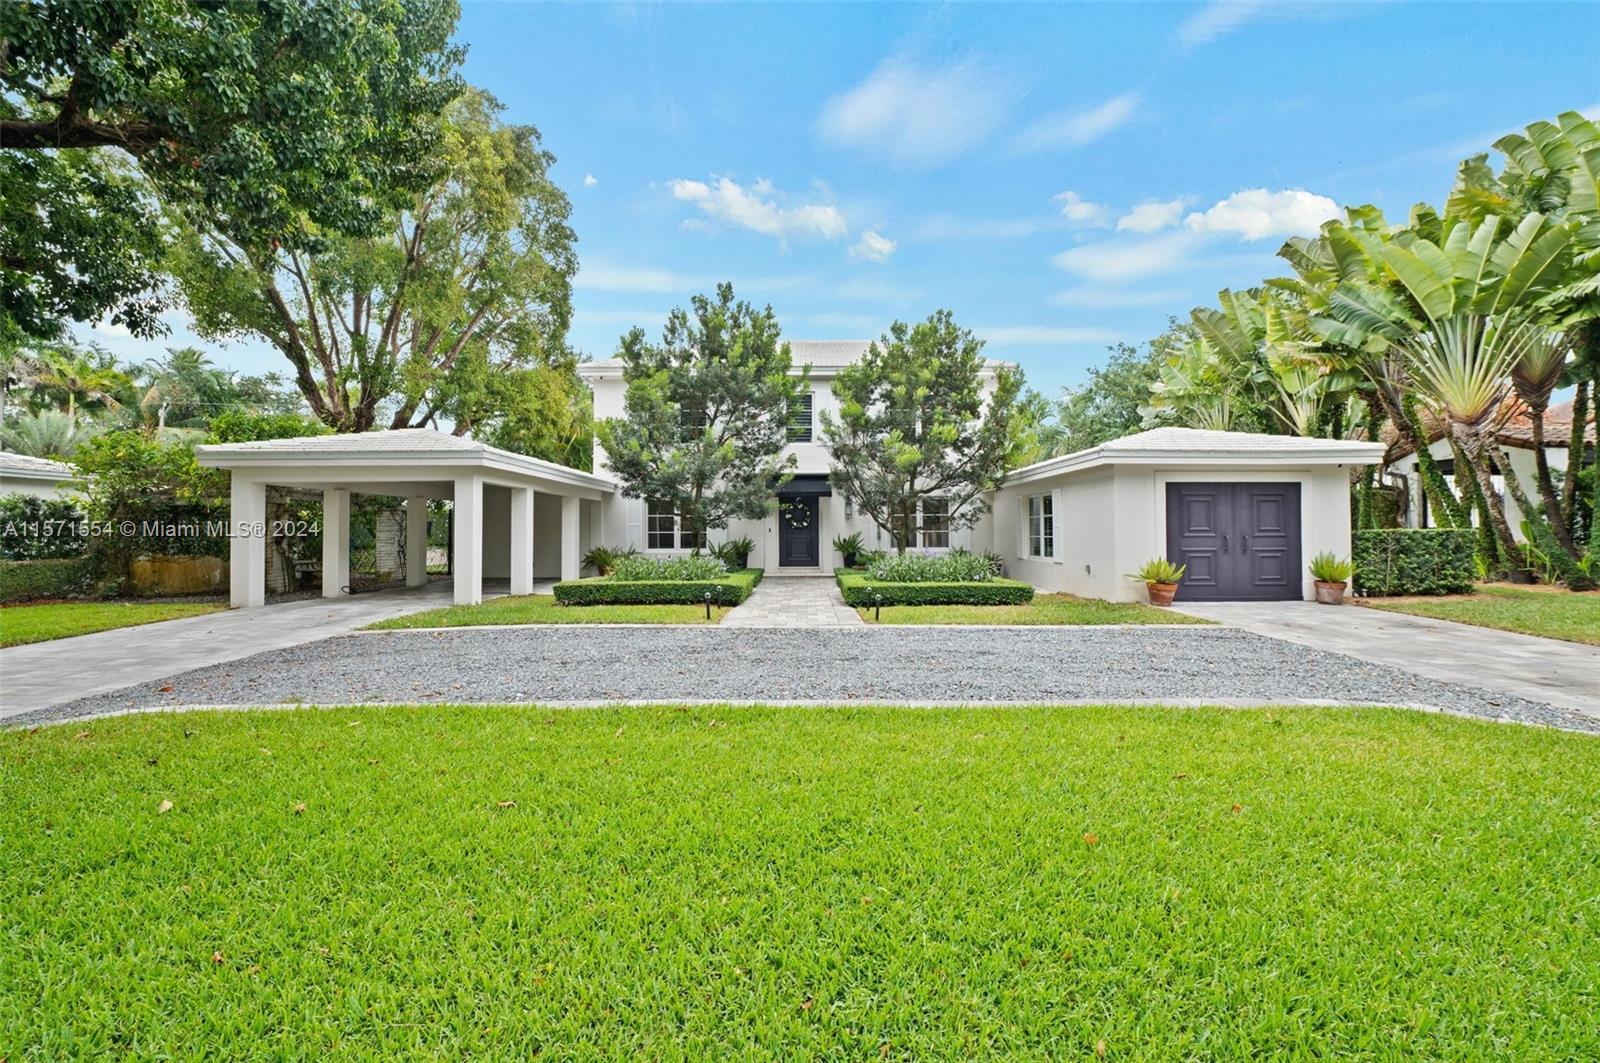 Timeless French-inspired residence, in the Italian Village, where a beautifully manicured front lawn